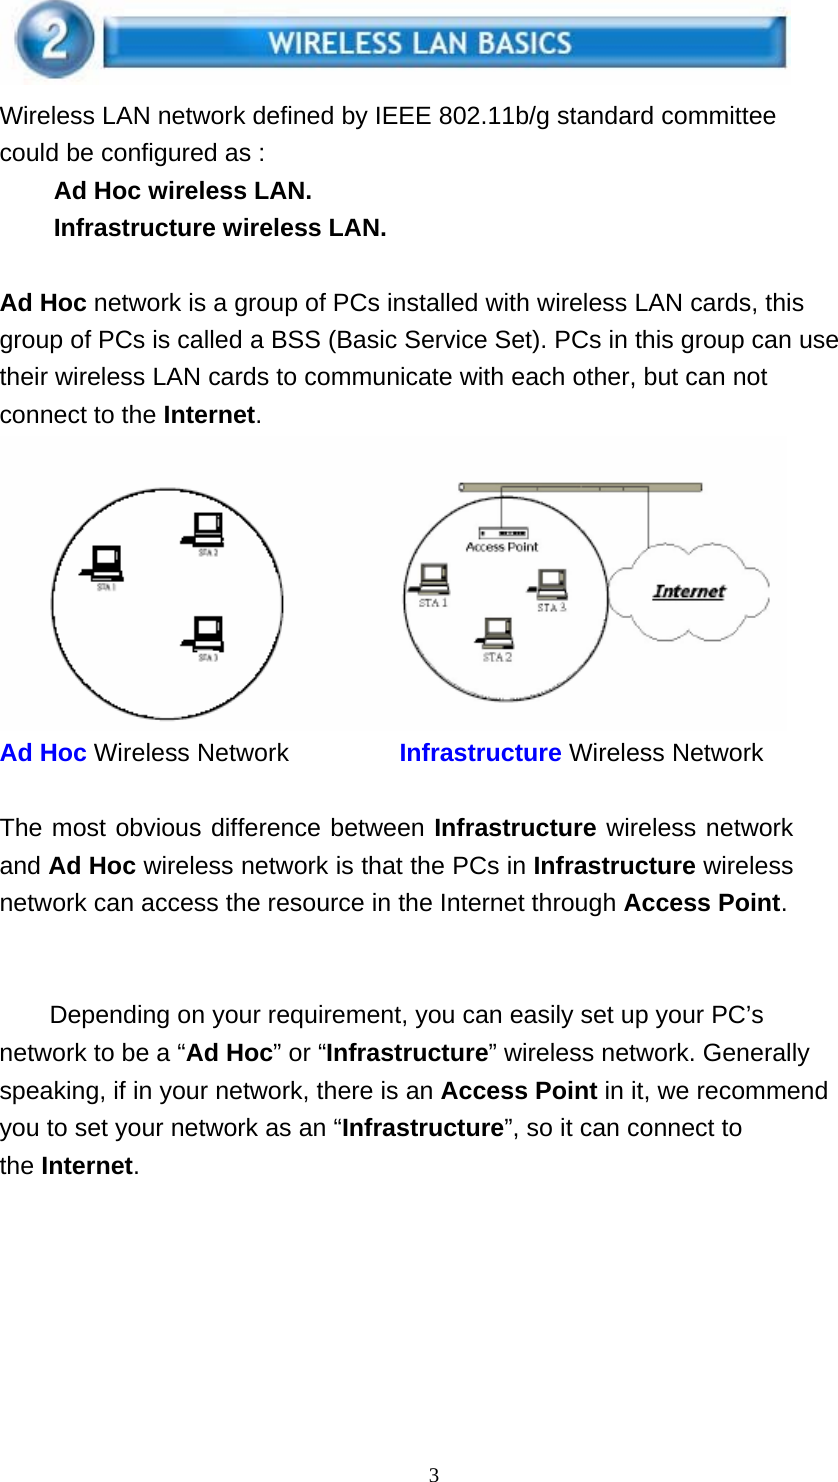 3     Wireless LAN network defined by IEEE 802.11b/g standard committee could be configured as : Ad Hoc wireless LAN. Infrastructure wireless LAN.   Ad Hoc network is a group of PCs installed with wireless LAN cards, this group of PCs is called a BSS (Basic Service Set). PCs in this group can use their wireless LAN cards to communicate with each other, but can not connect to the Internet.  Ad Hoc Wireless Network  Infrastructure Wireless Network   The most obvious difference between Infrastructure wireless network and Ad Hoc wireless network is that the PCs in Infrastructure wireless network can access the resource in the Internet through Access Point.     Depending on your requirement, you can easily set up your PC’s network to be a “Ad Hoc” or “Infrastructure” wireless network. Generally speaking, if in your network, there is an Access Point in it, we recommend you to set your network as an “Infrastructure”, so it can connect to the Internet. 